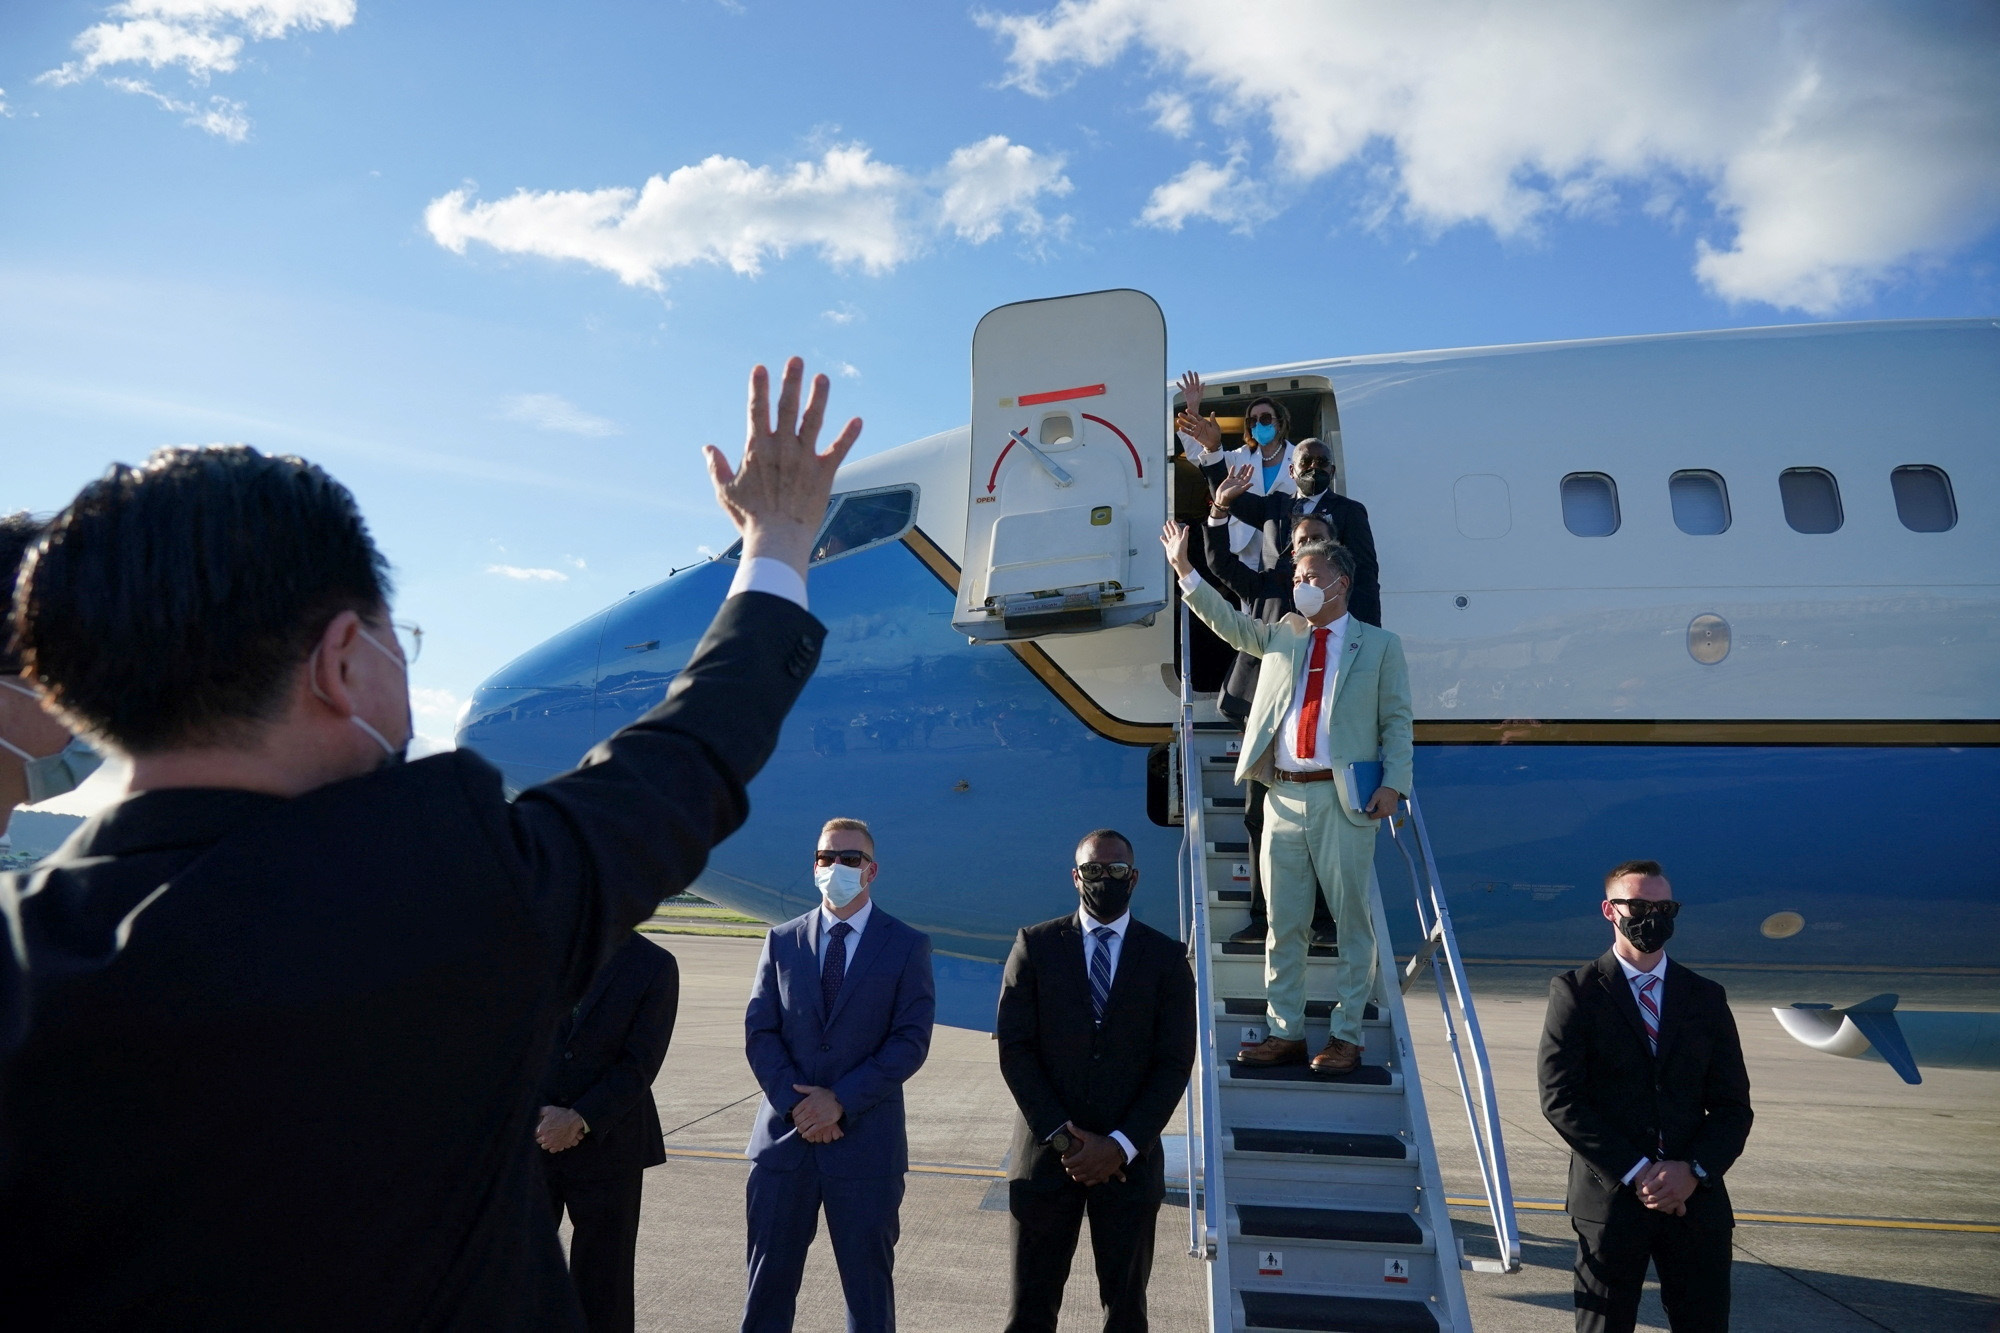 Taiwan Foreign Minister Joseph Wu waves at U.S. House of Representatives Speaker Nancy Pelosi and other members of the delegation as they board a plane before leaving Taipei Songshan Airport, in Taipei, Taiwan, on August 3.